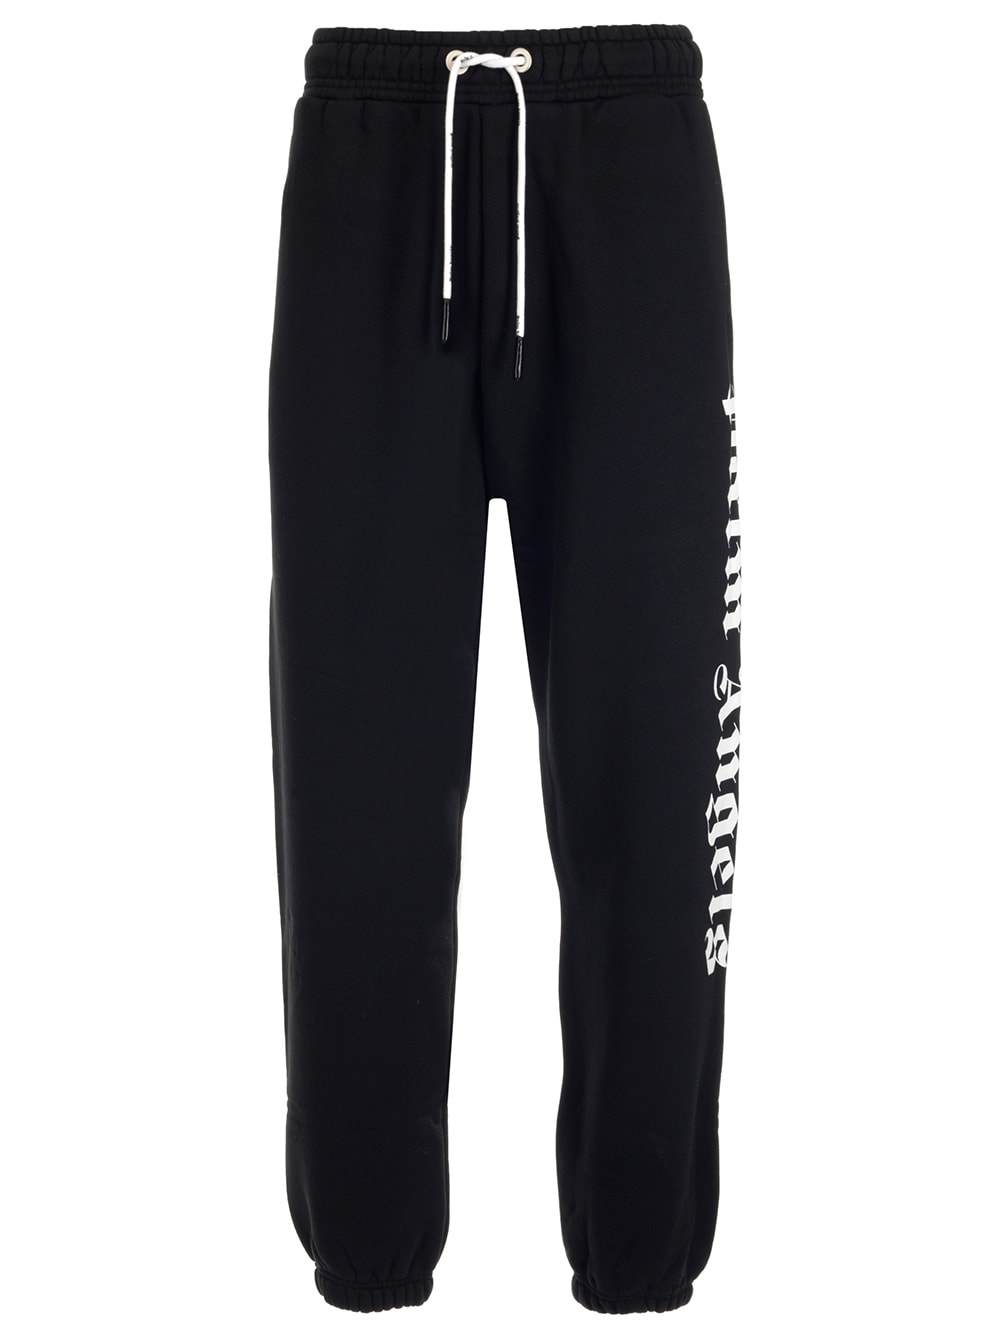 PALM ANGELS BLACK JOGGERS WITH SIDE LOGO